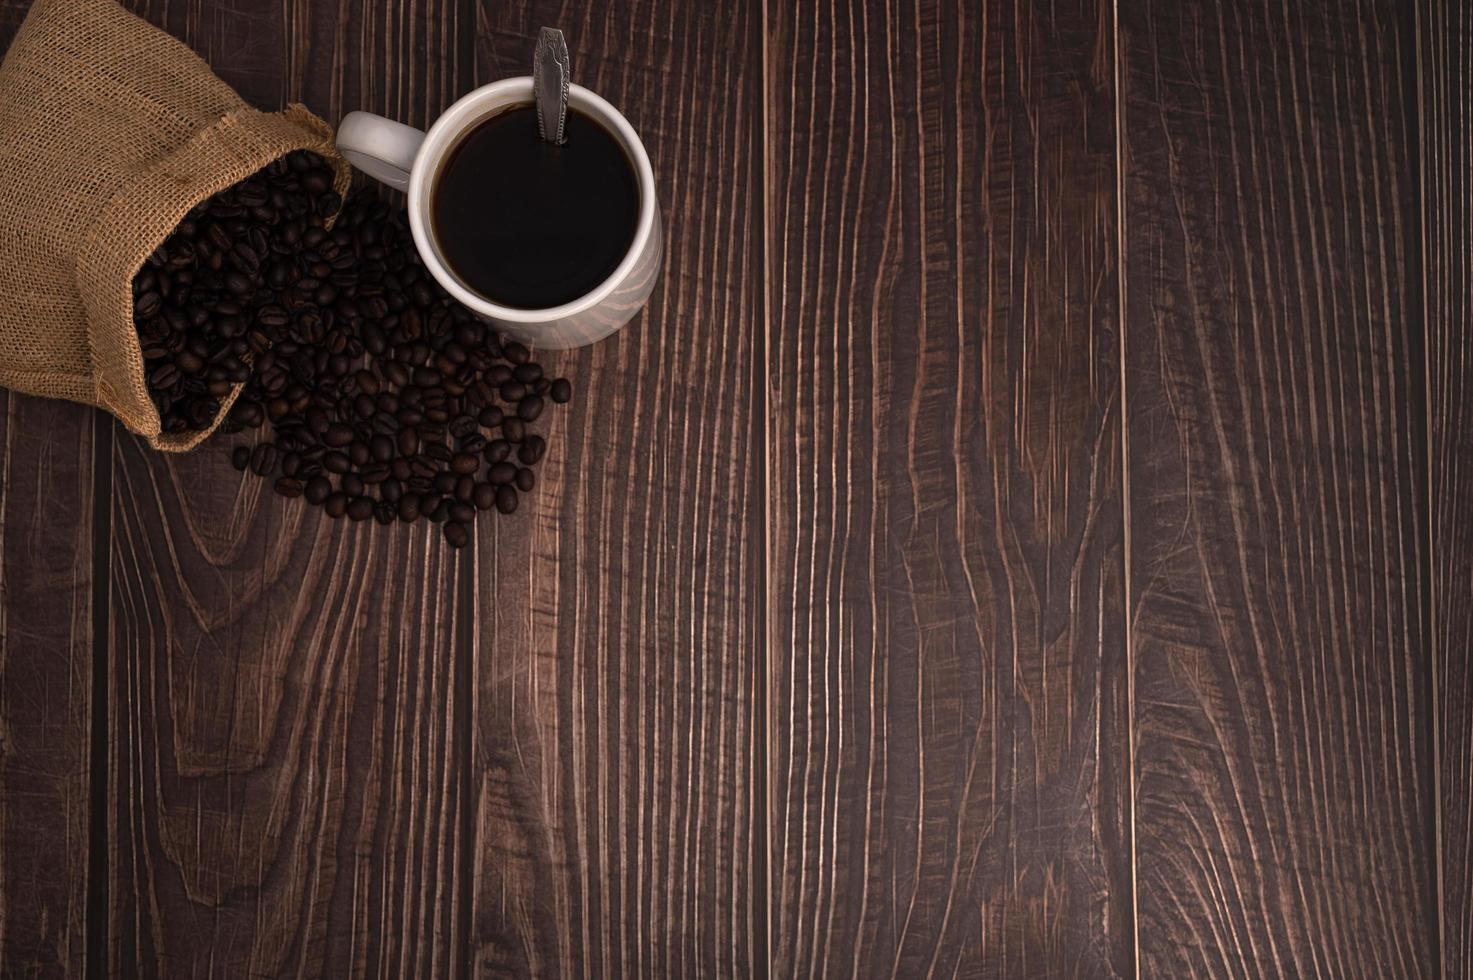 A coffee mug and coffee beans on a wooden table, love coffee concept photo